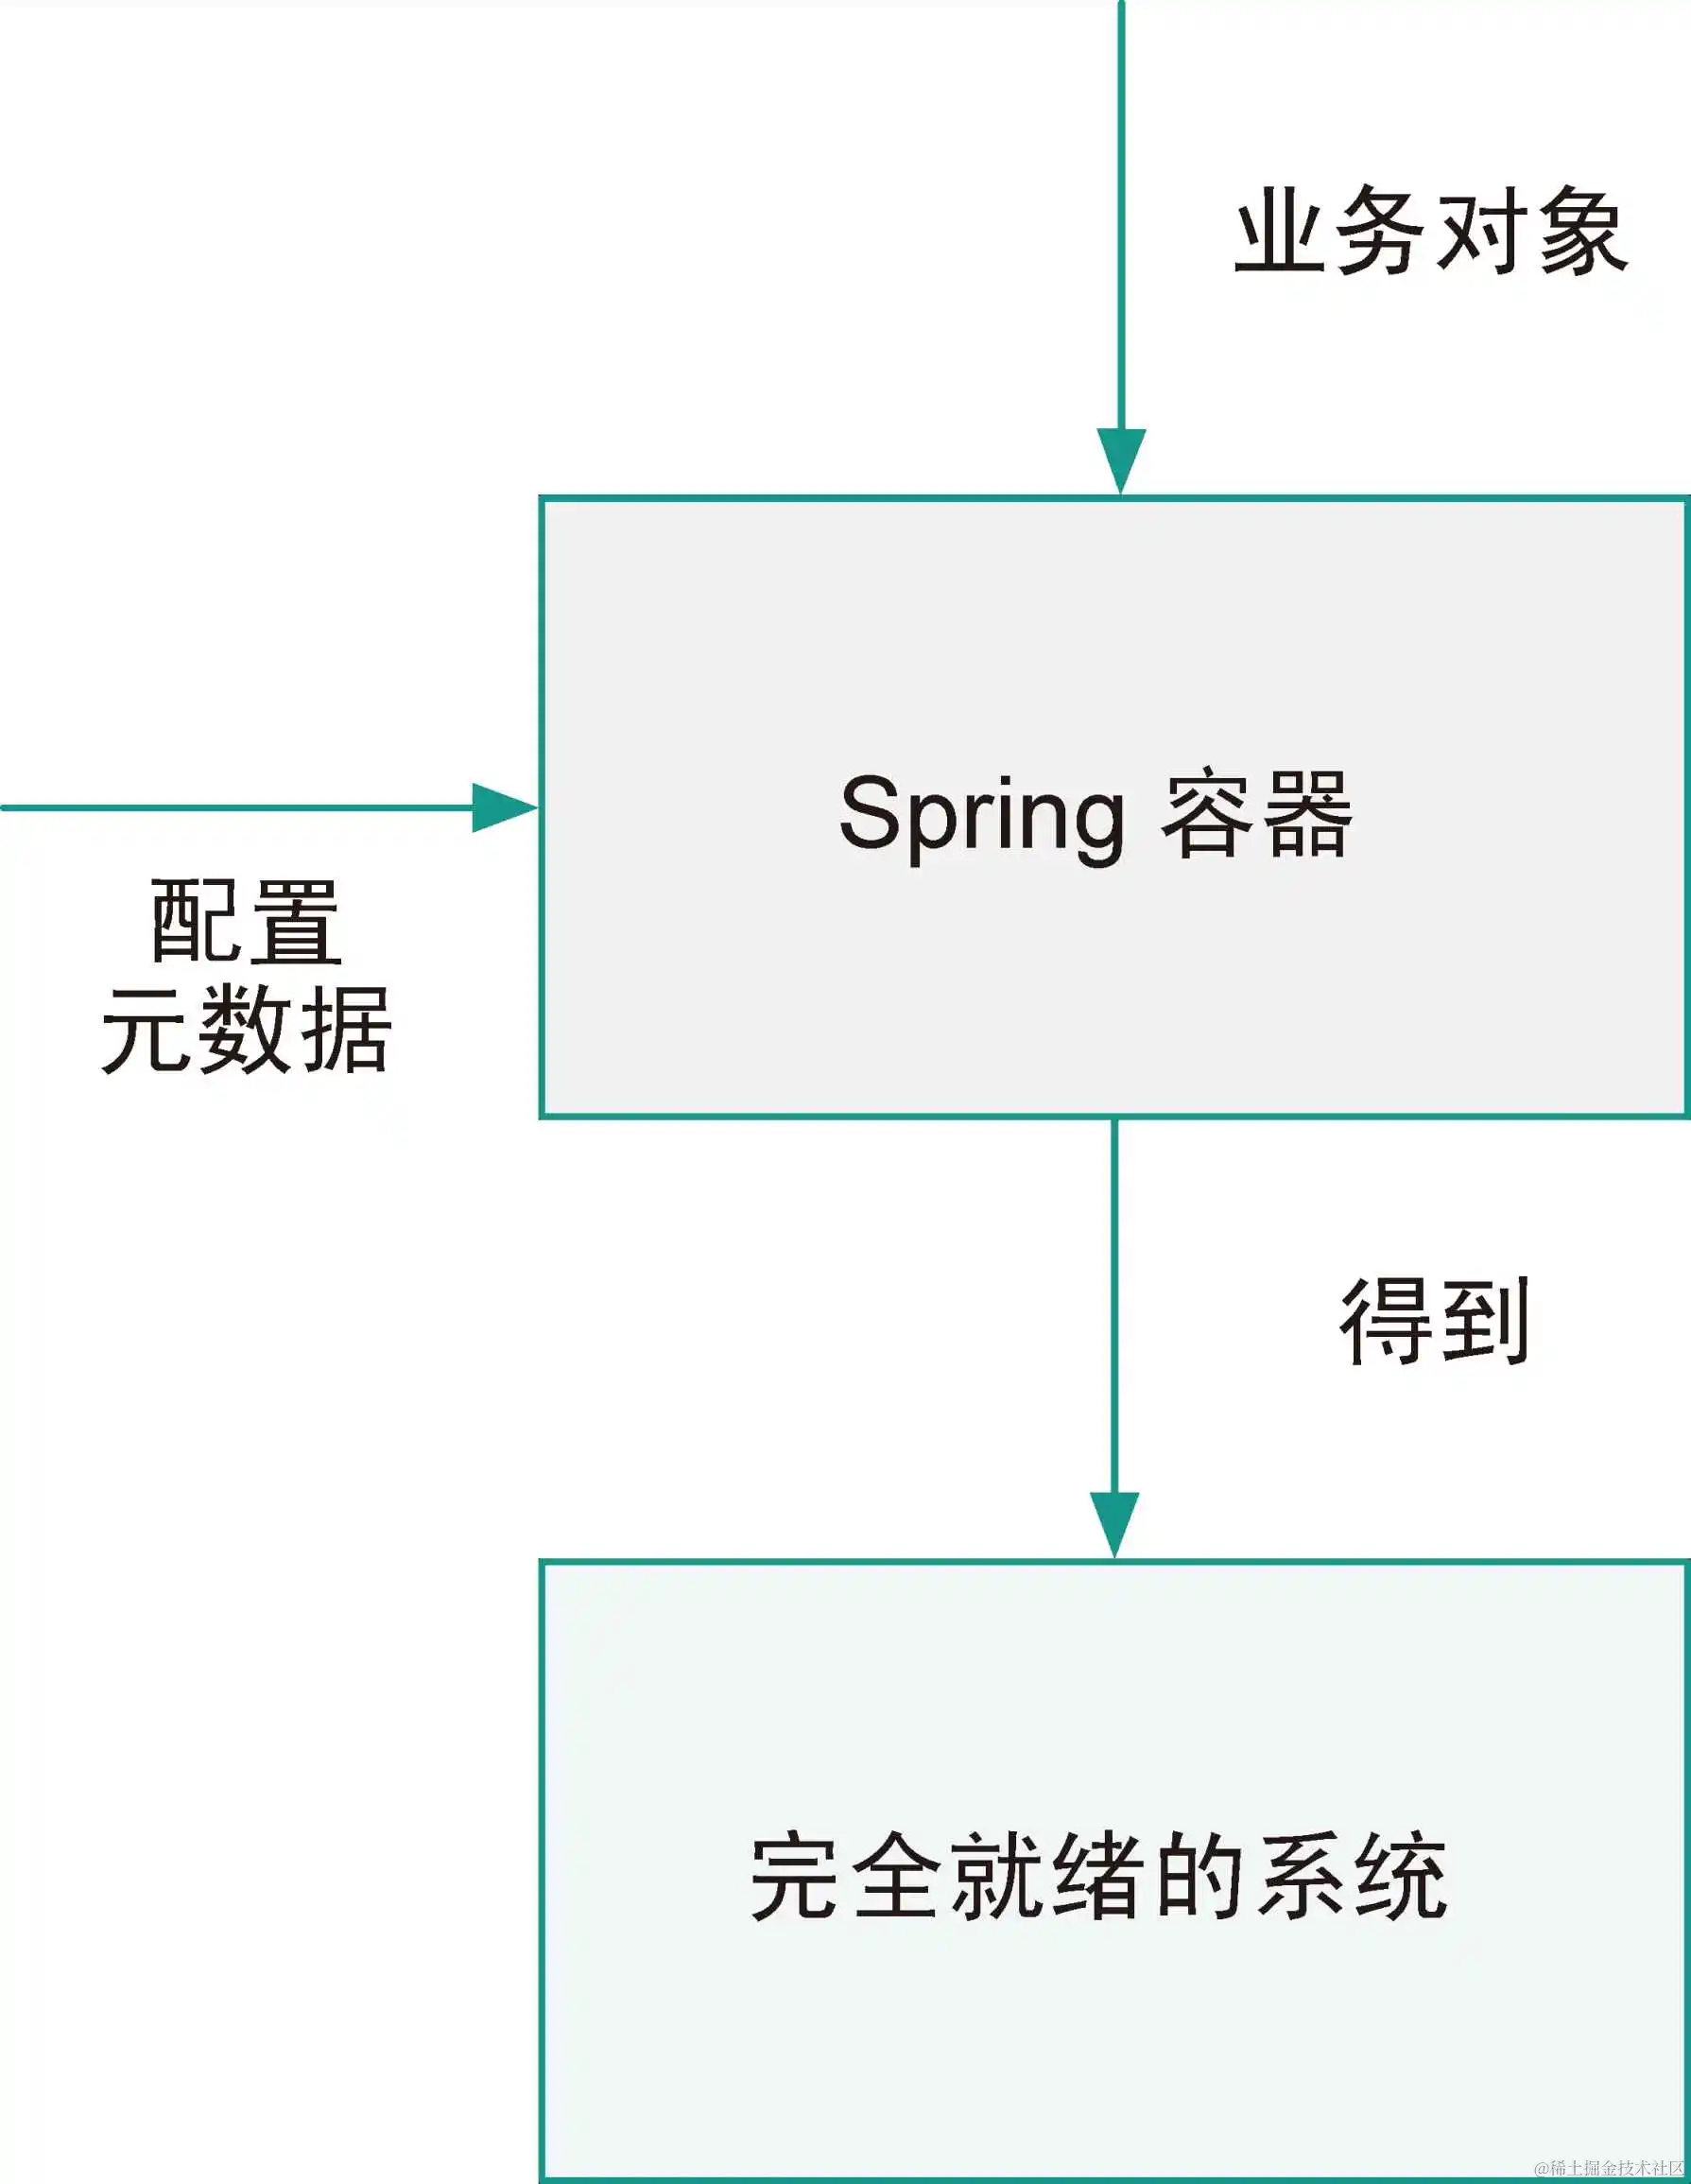 <span style='color:red;'>第</span> <span style='color:red;'>2</span> <span style='color:red;'>章</span>：Spring Framework 中的 <span style='color:red;'>IoC</span> 容器